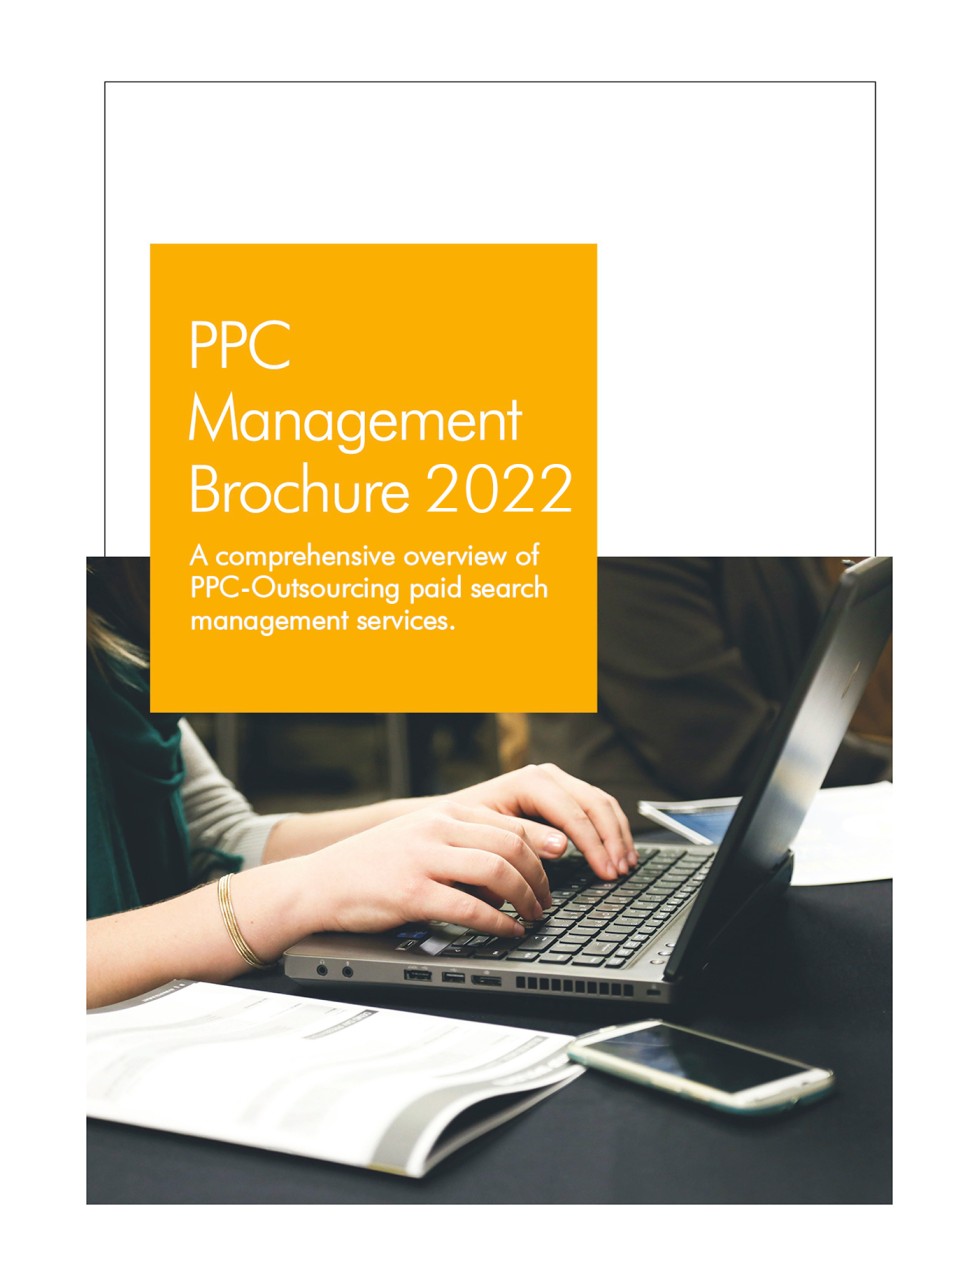 PPC management guide 2019